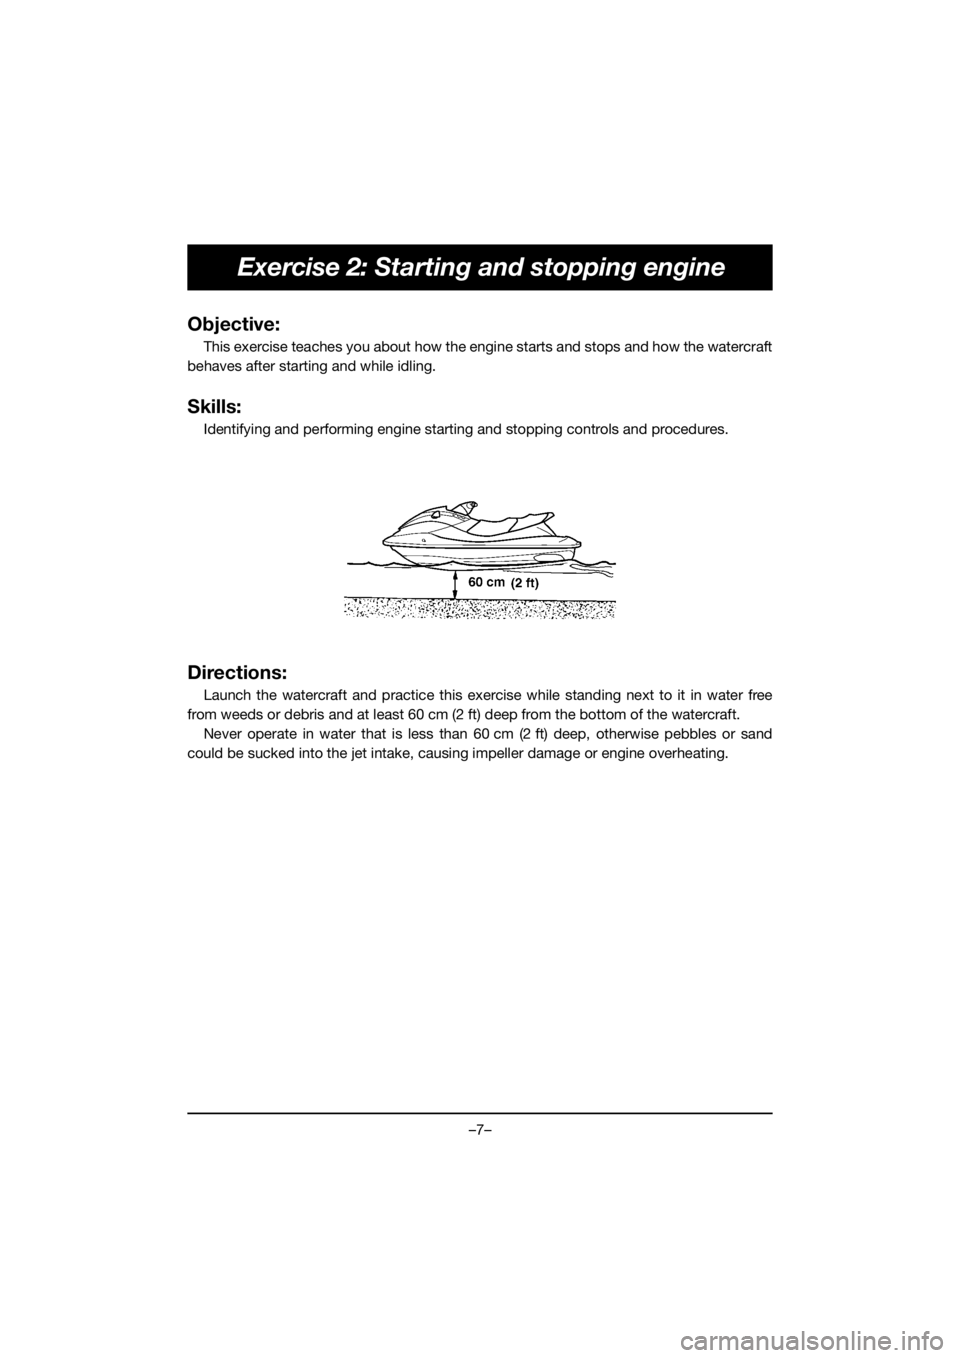 YAMAHA VX LIMITED HO 2021  Owners Manual –7–
Exercise 2: Starting and stopping engine
Objective:
This exercise teaches you about how the engine starts and stops and how the watercraft
behaves after starting and while idling.
Skills:
Iden